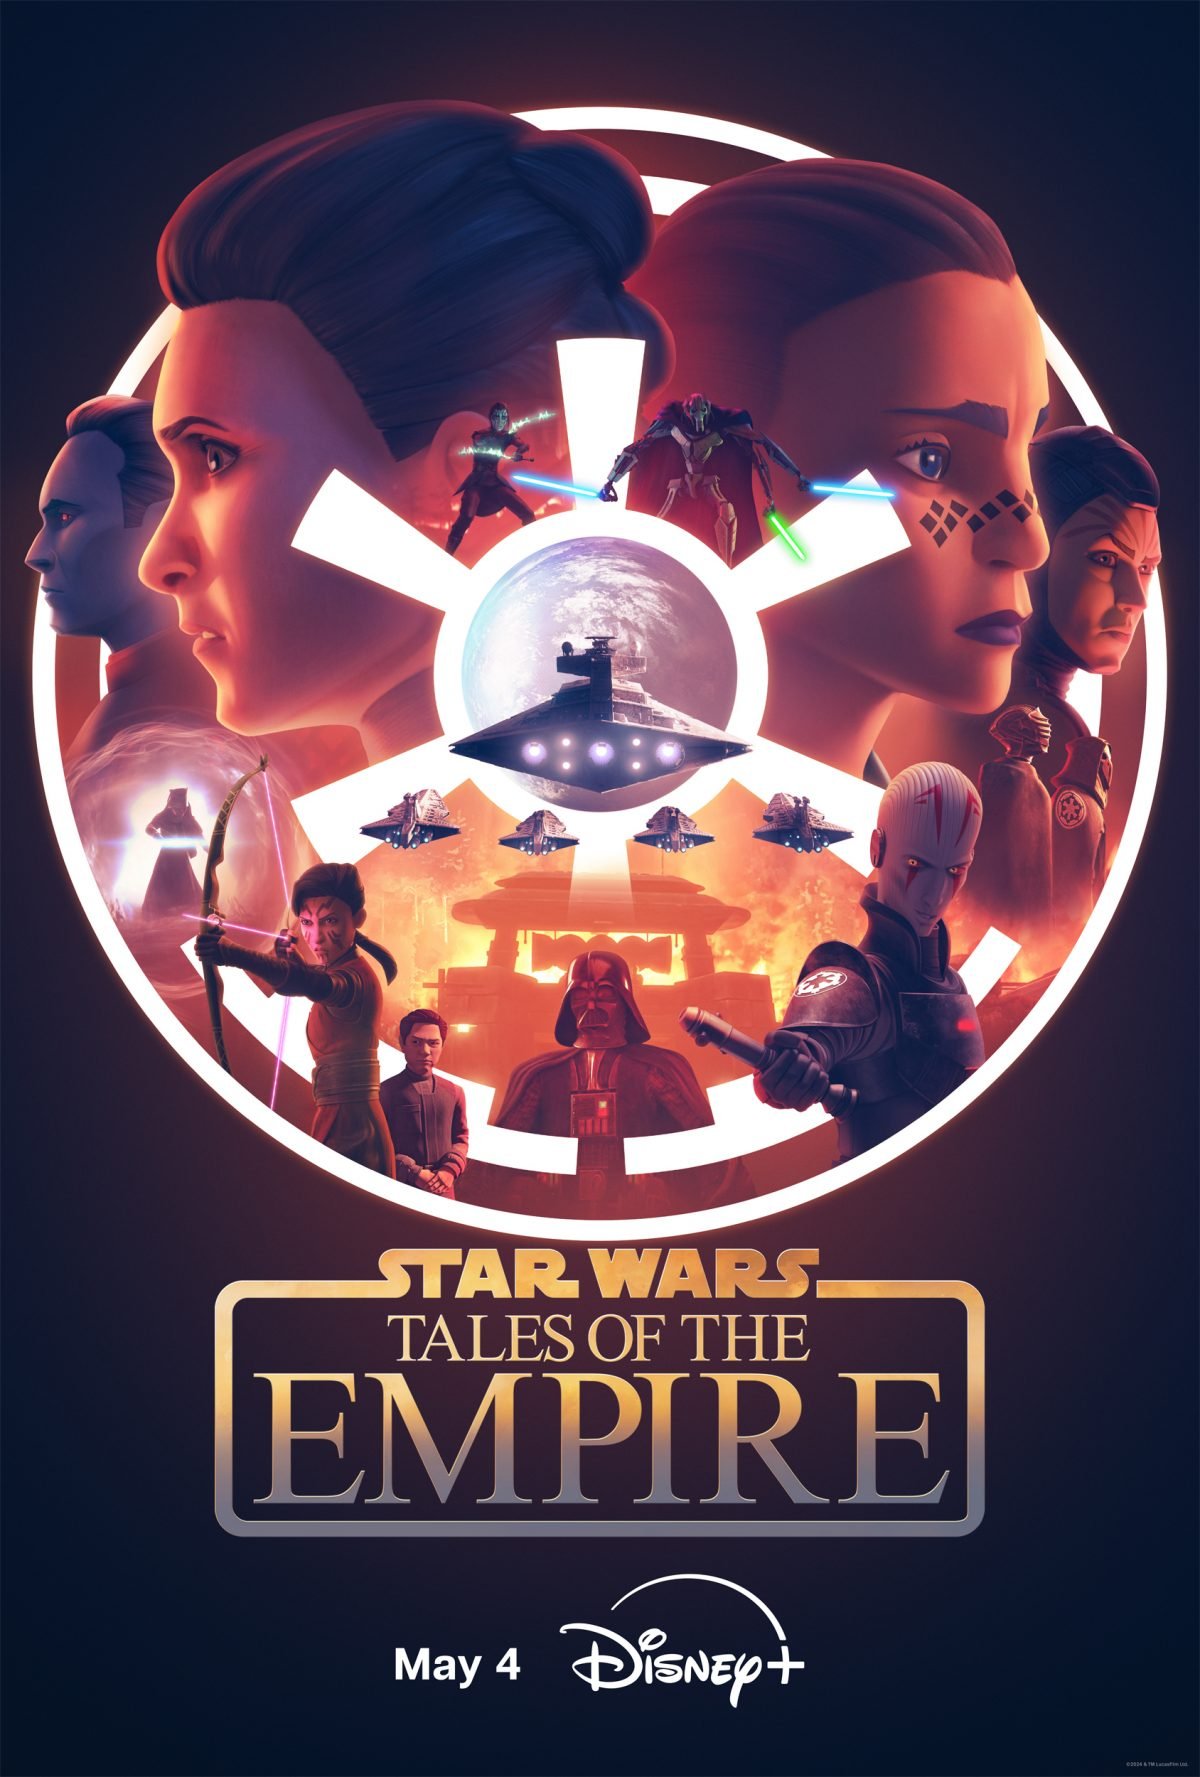 The poster for Star Wars: Tales of the Empire